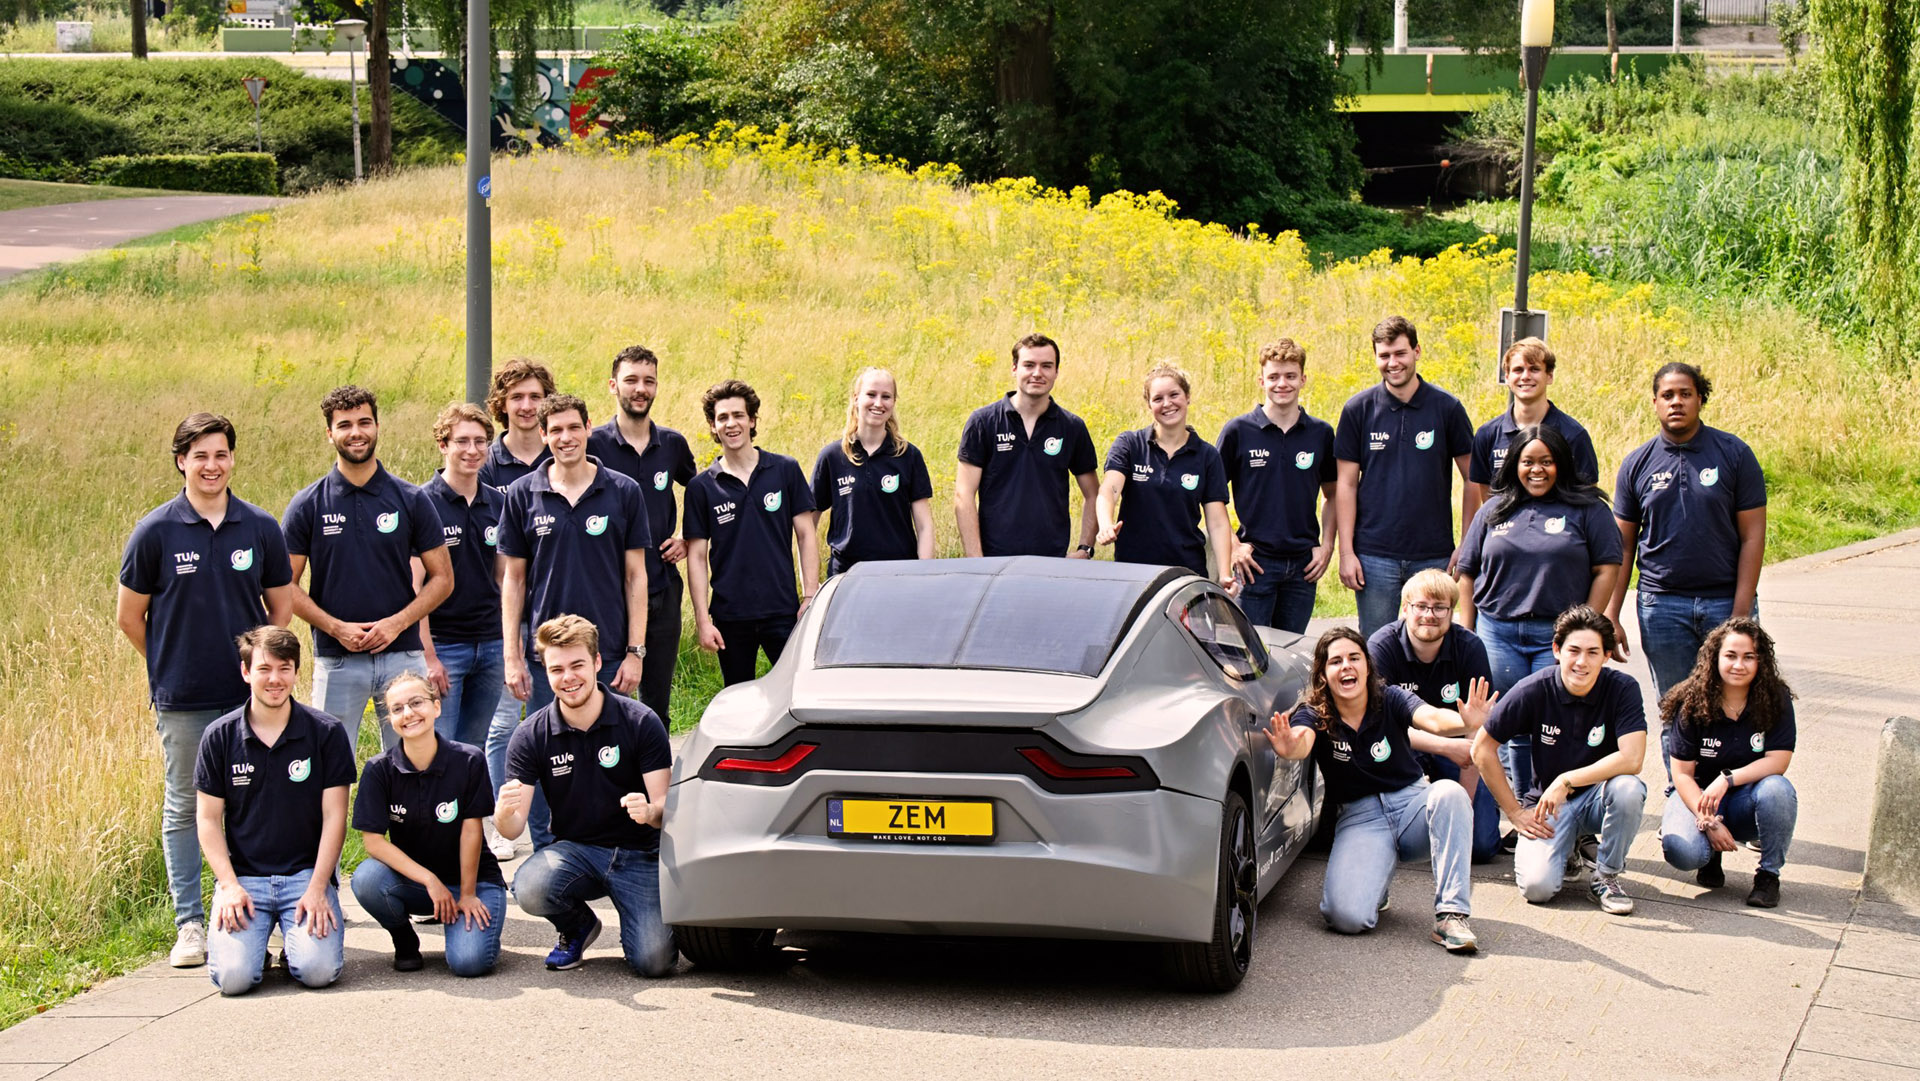 35 students make up the team called Solar Team Eindhoven, creator of the ZEM